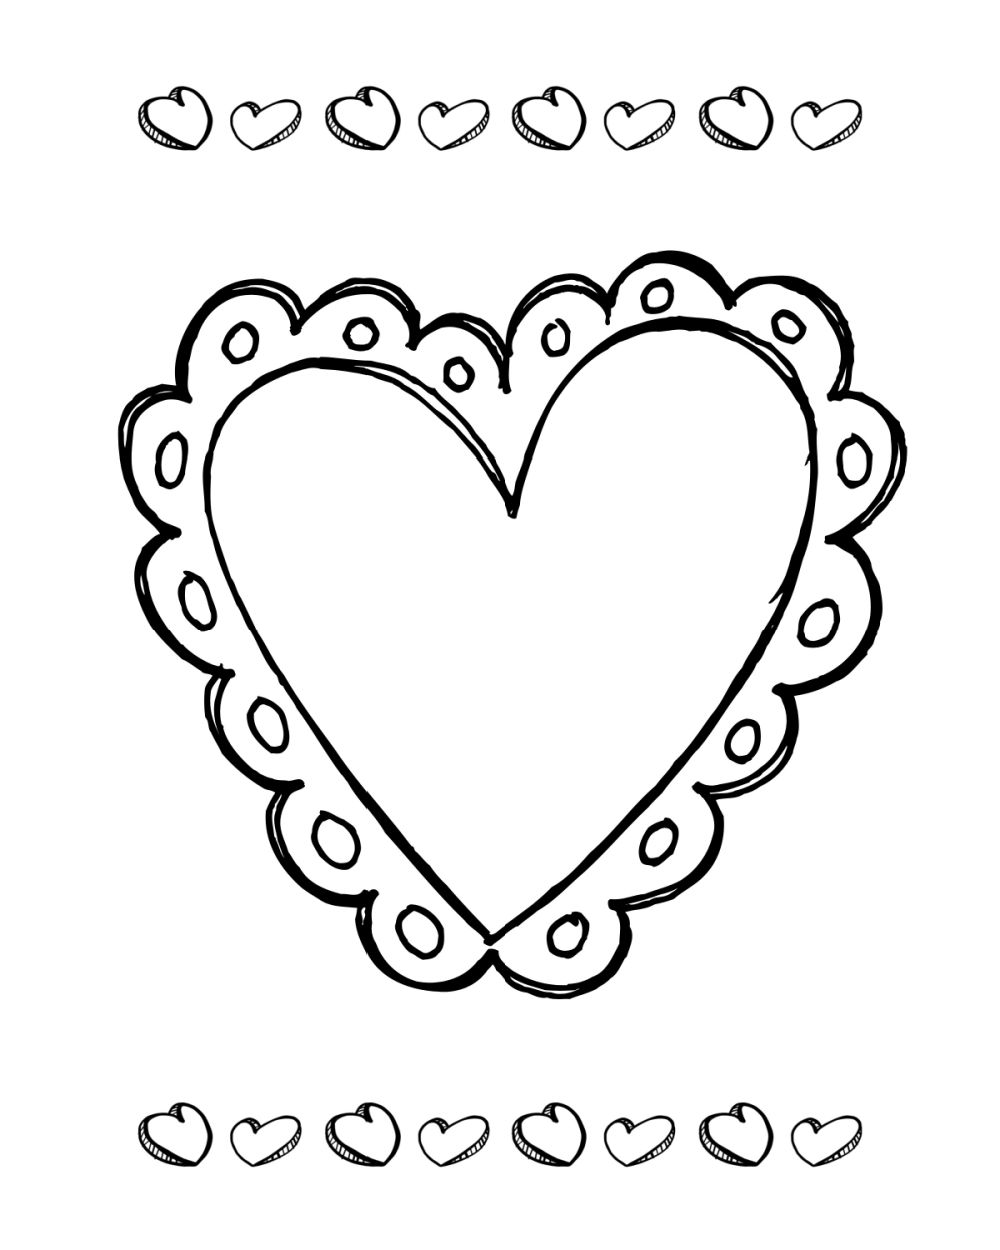 Free Printable Valentine Heart Coloring Page - Mama Likes This